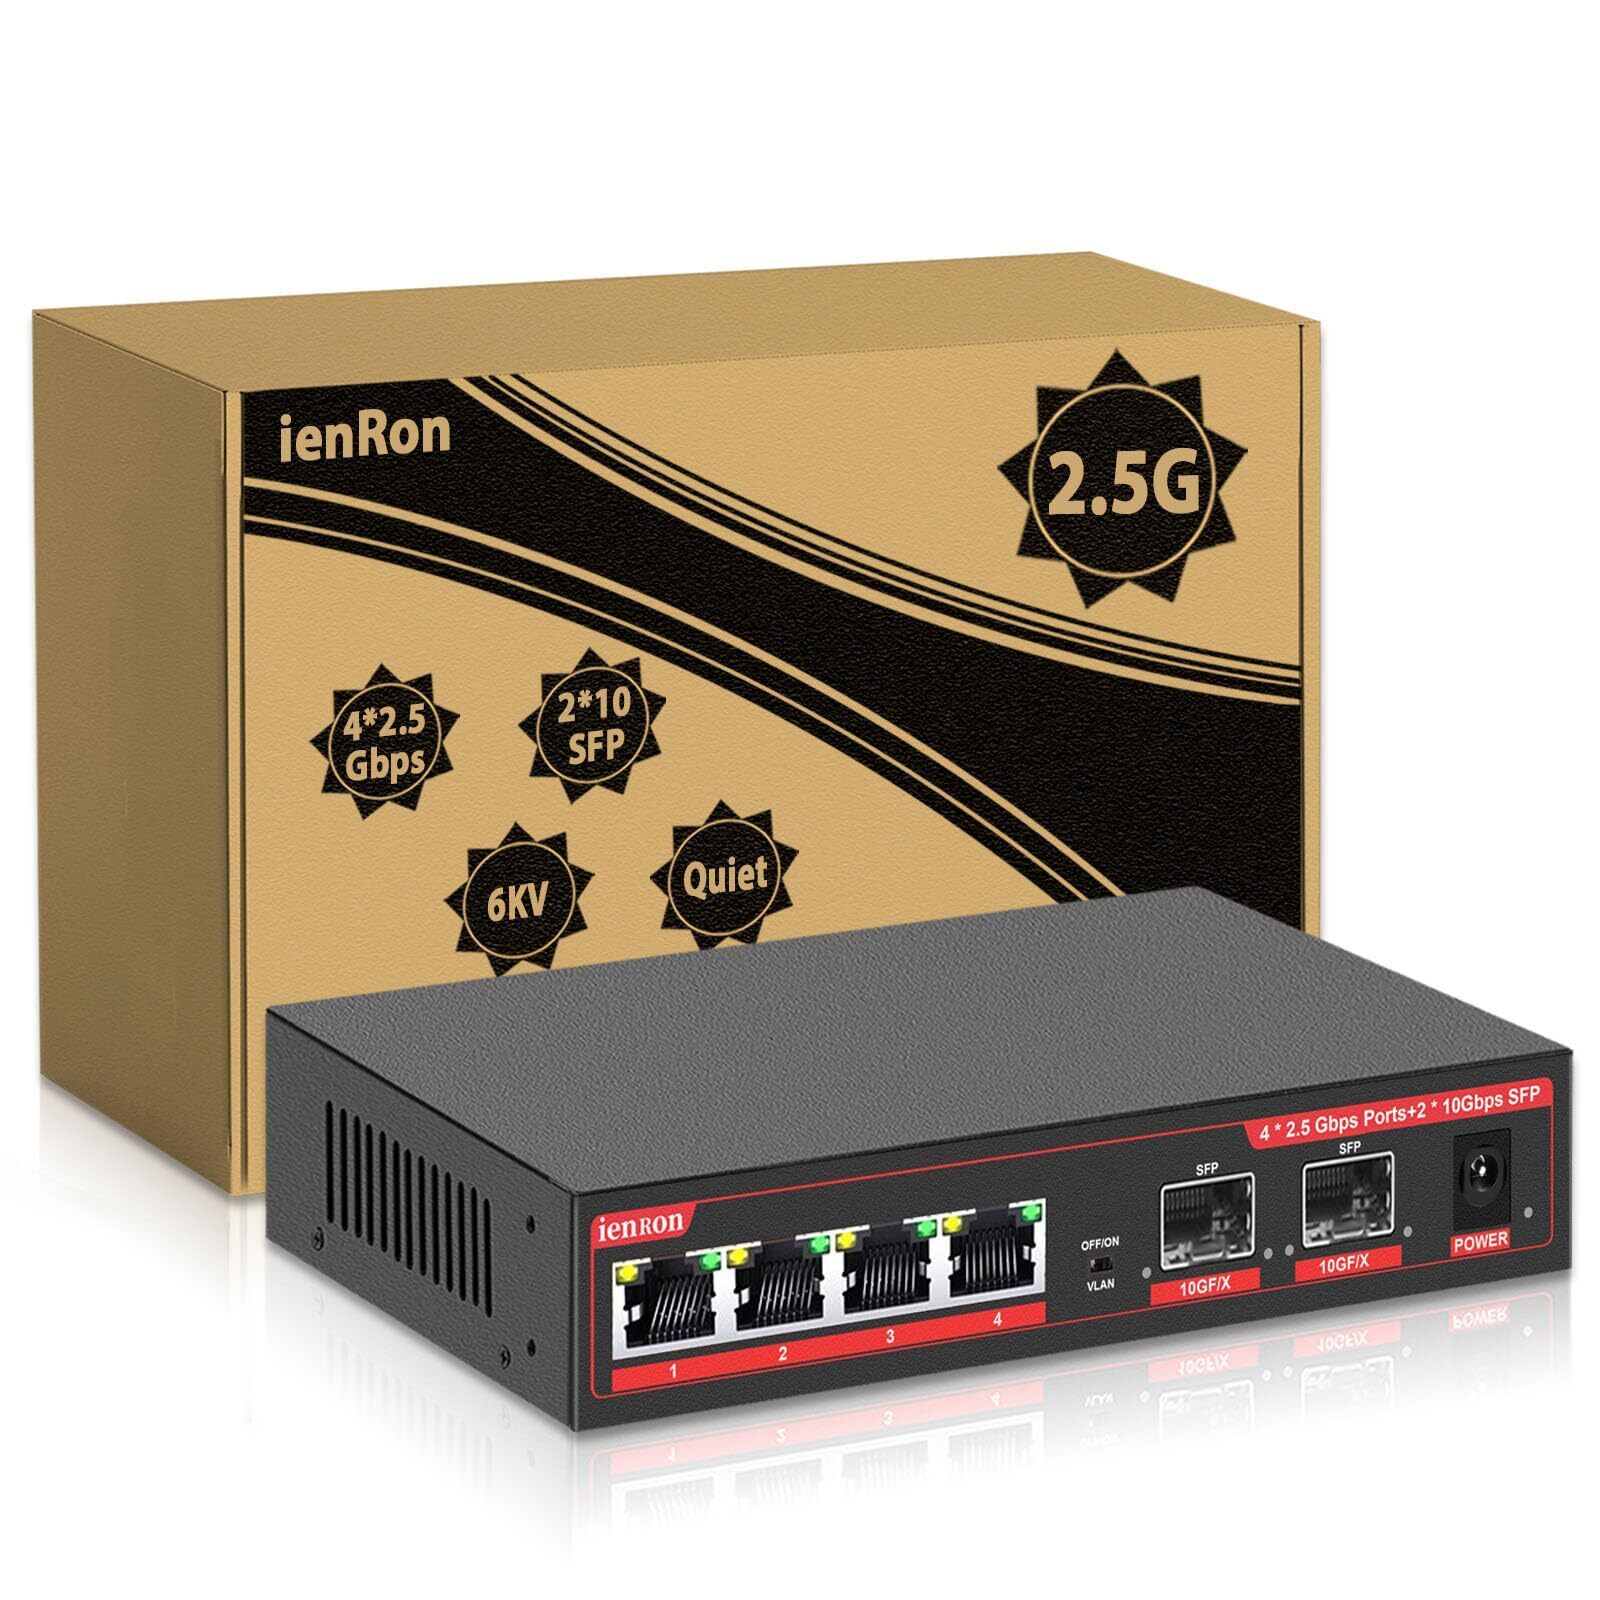 ienRon 6 Port 2.5G Unmanaged Ethernet Switch